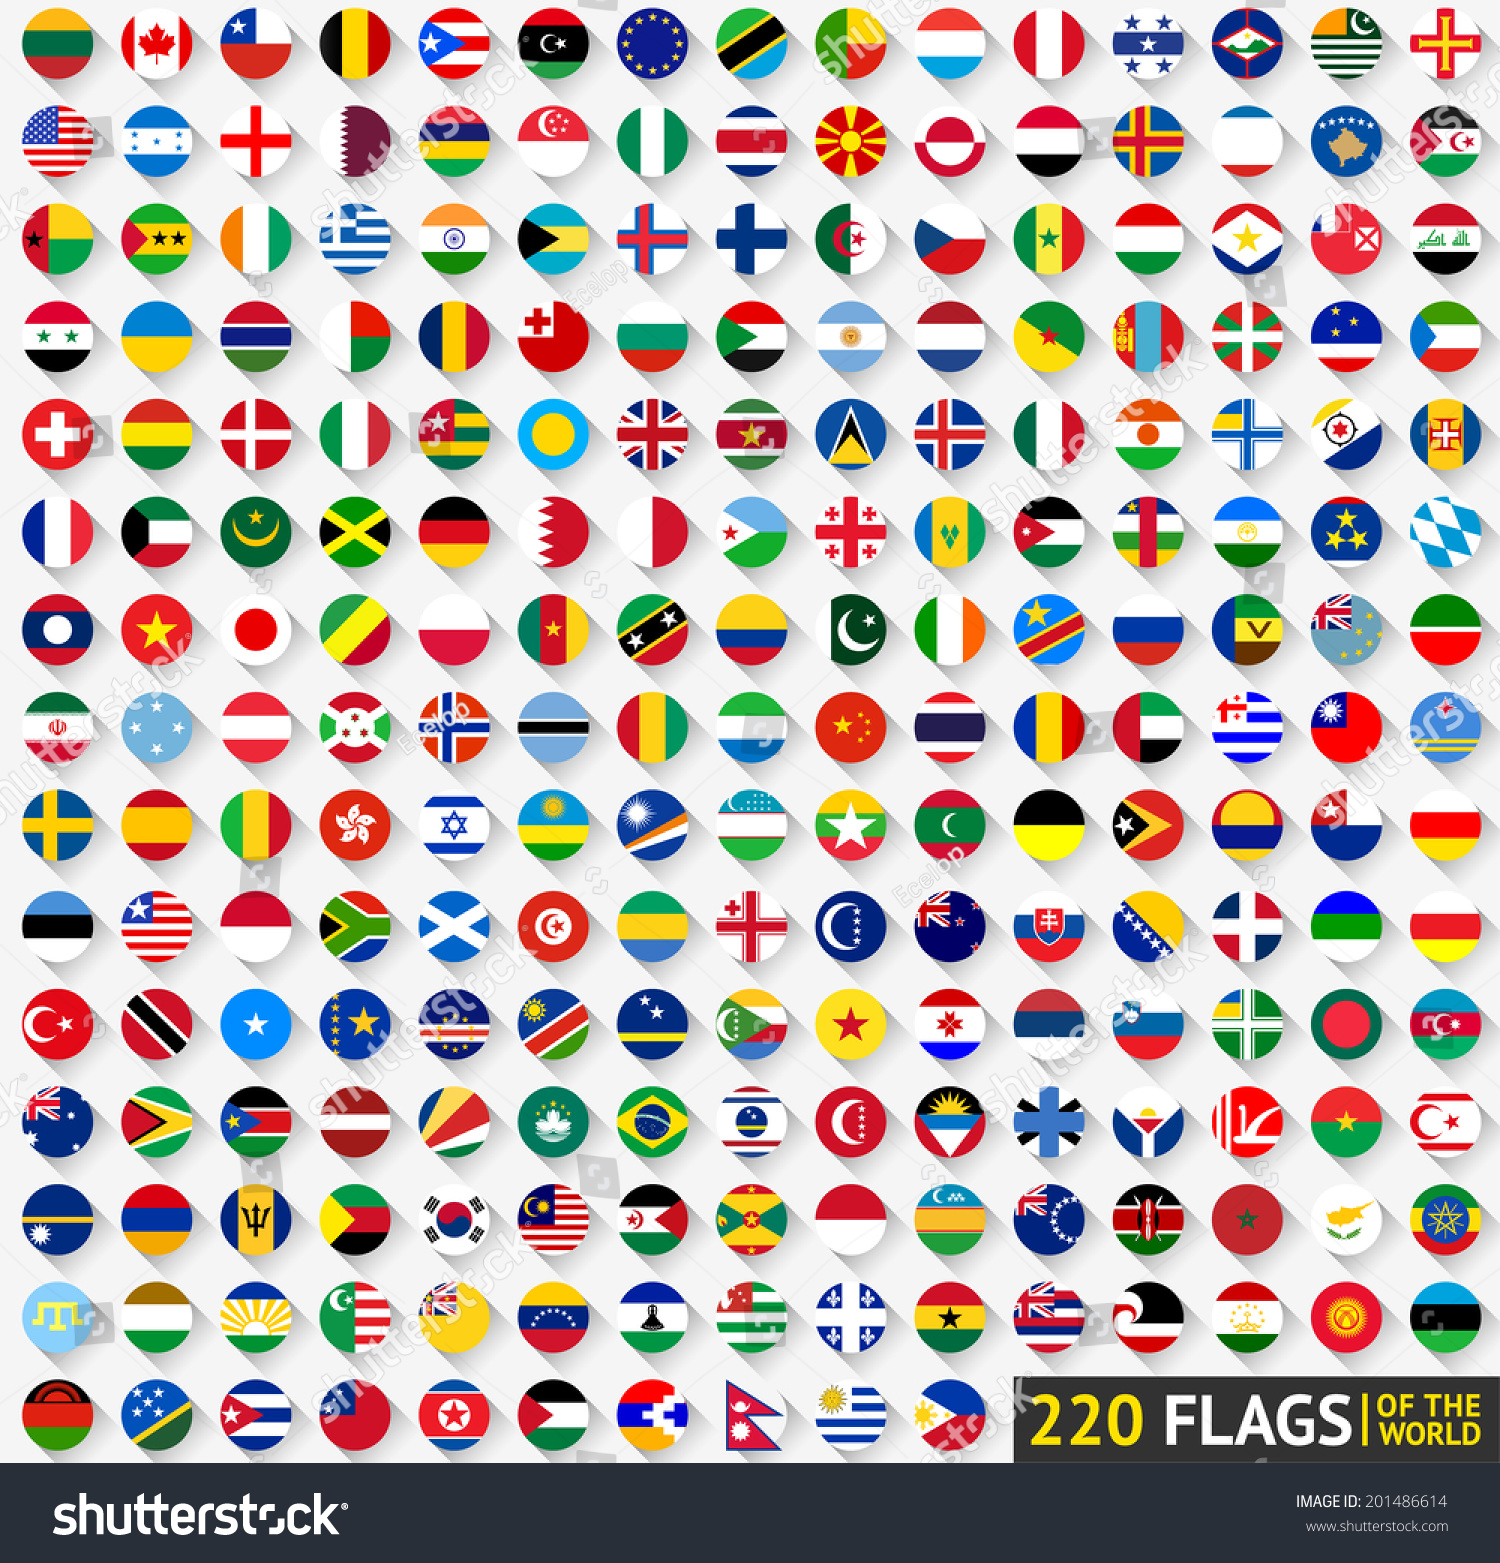 220 Flags of the world, circular shape, flat - Royalty Free Stock ...